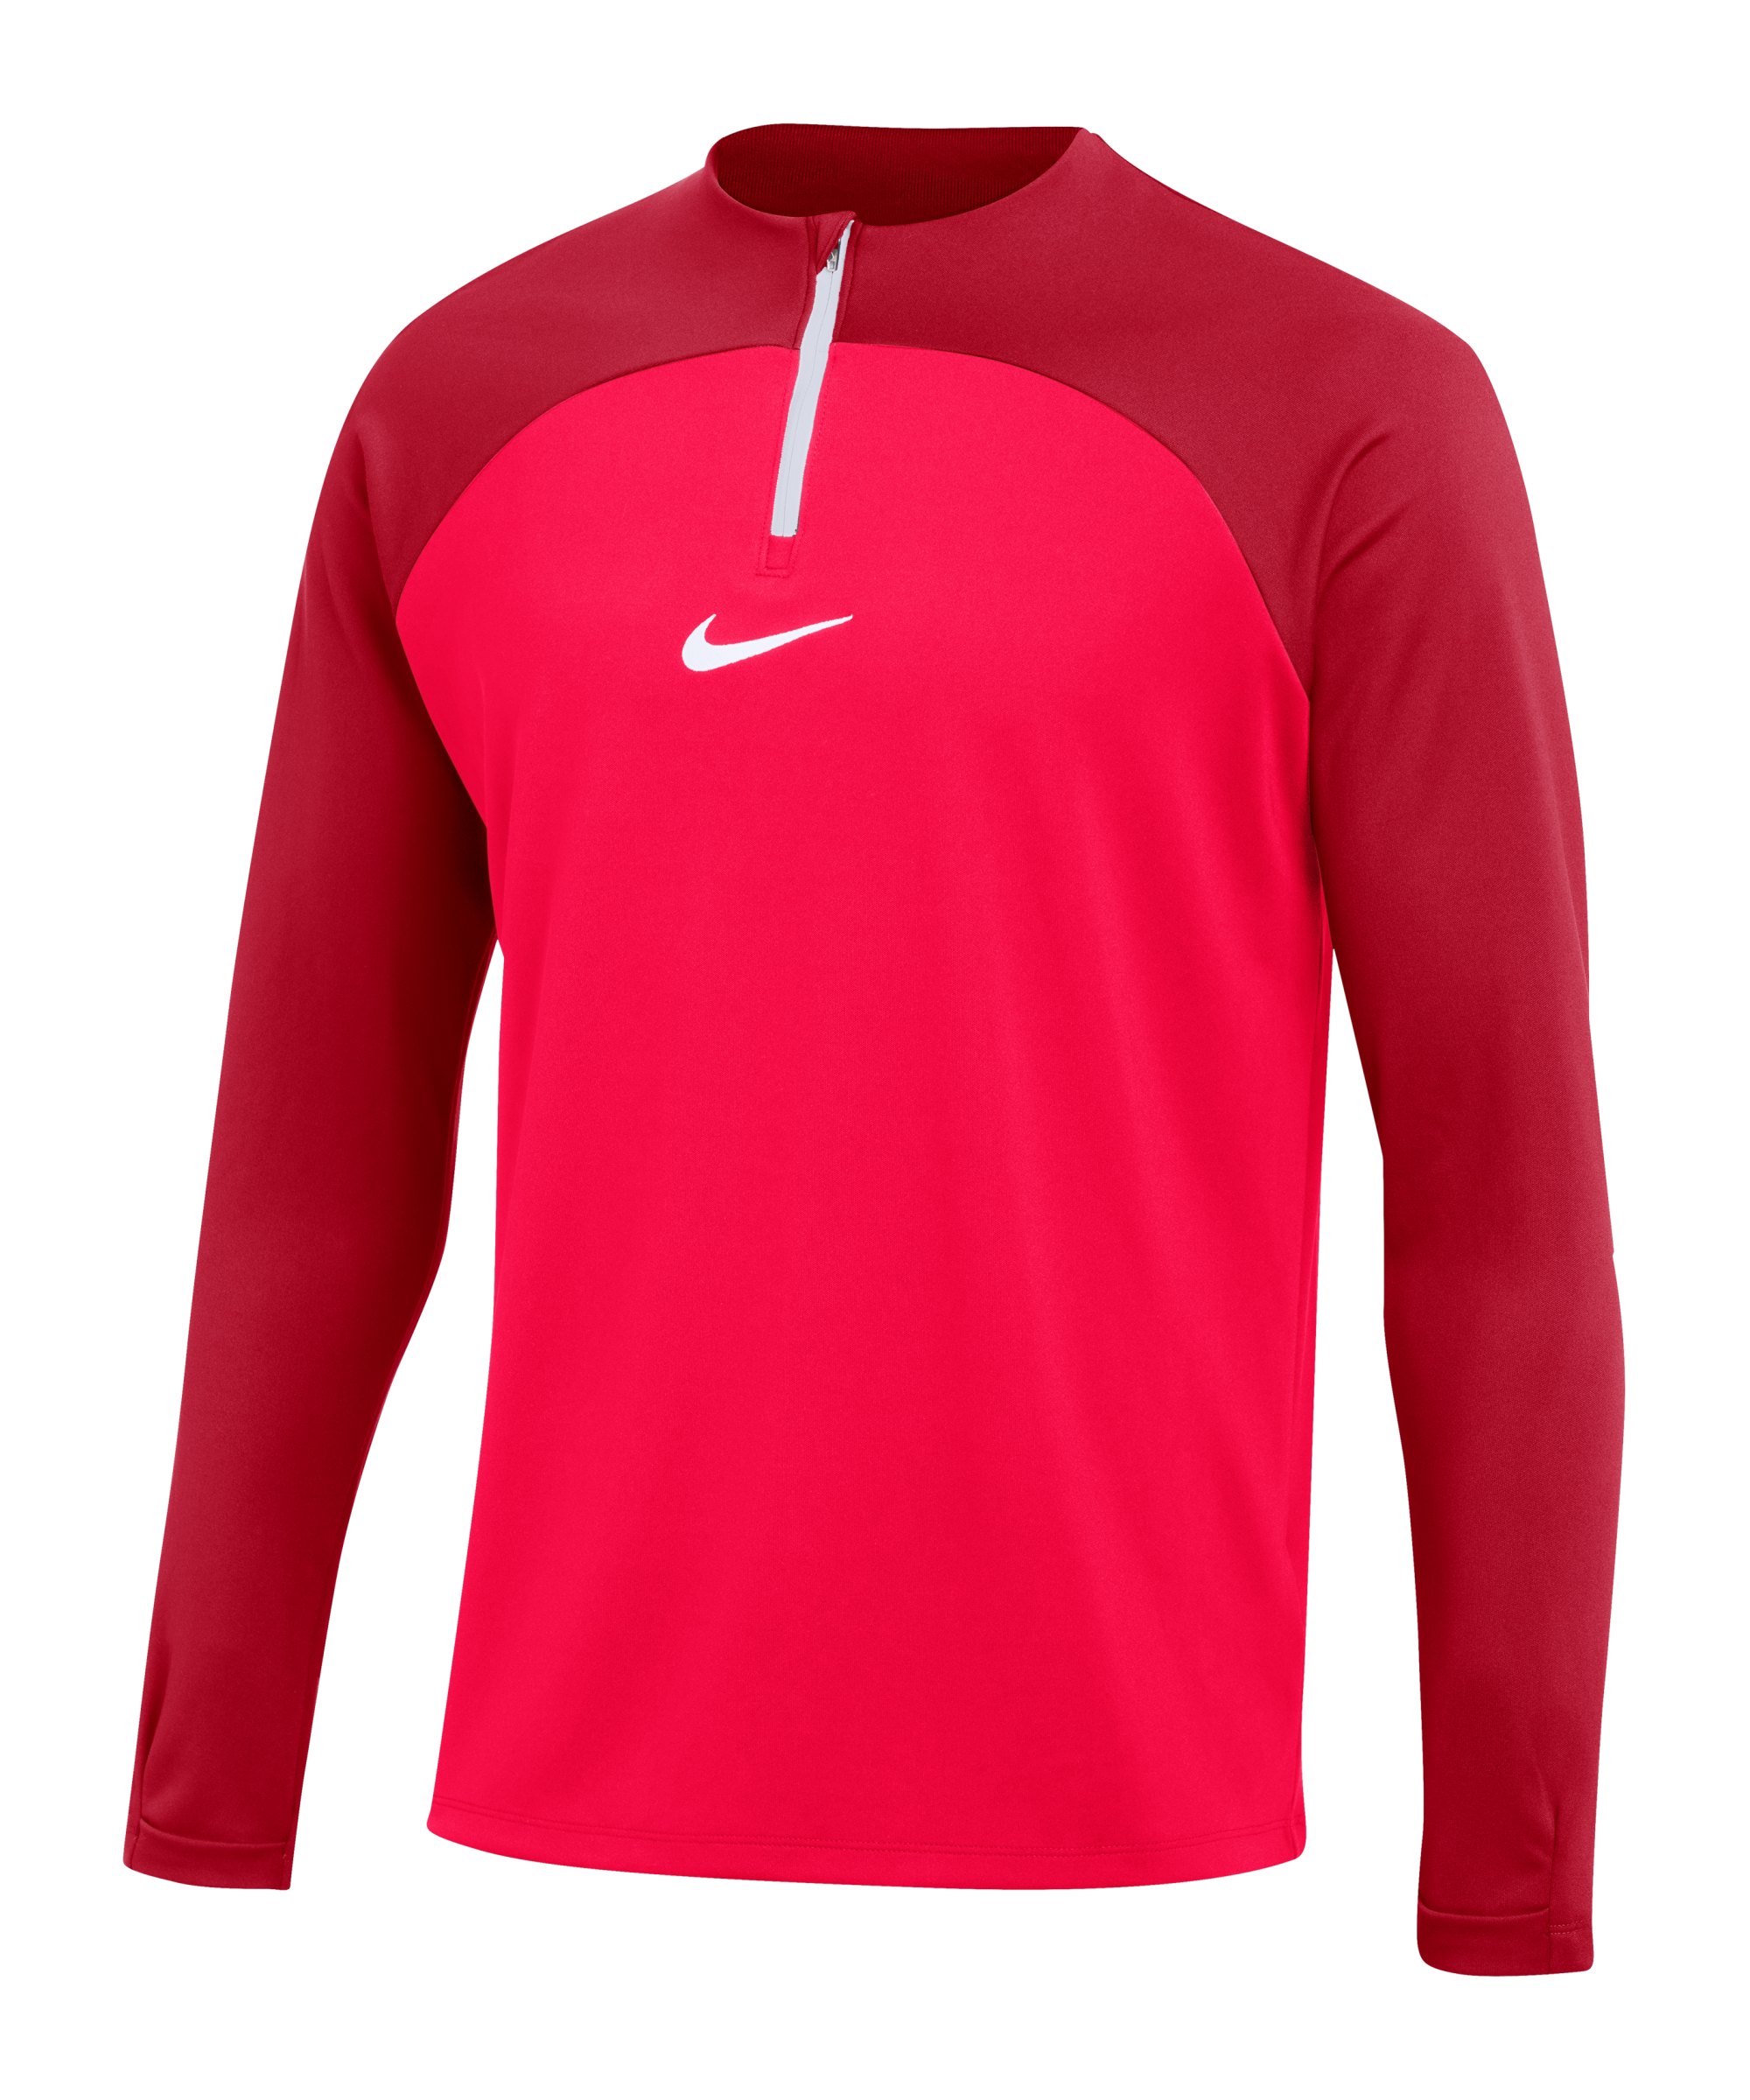 Nike Academy Pro Drill Top Rot Weiss F635 - rot